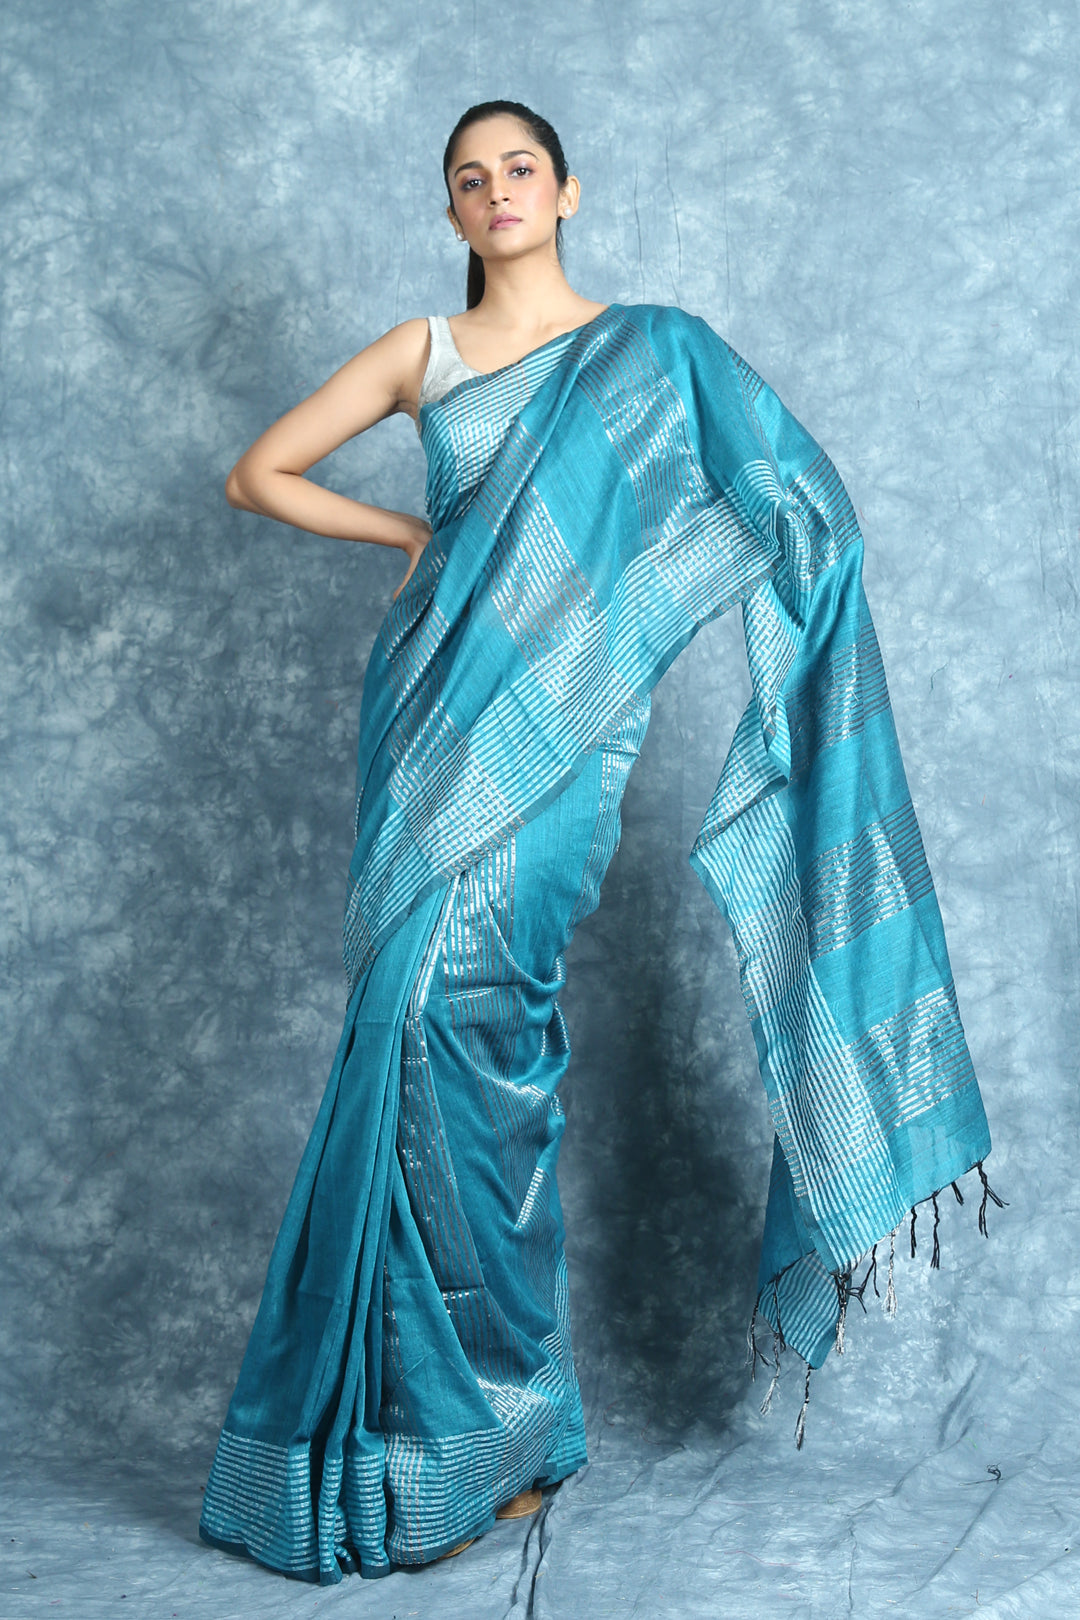 Teal Blended Cotton Saree With Silver Zari Stripes